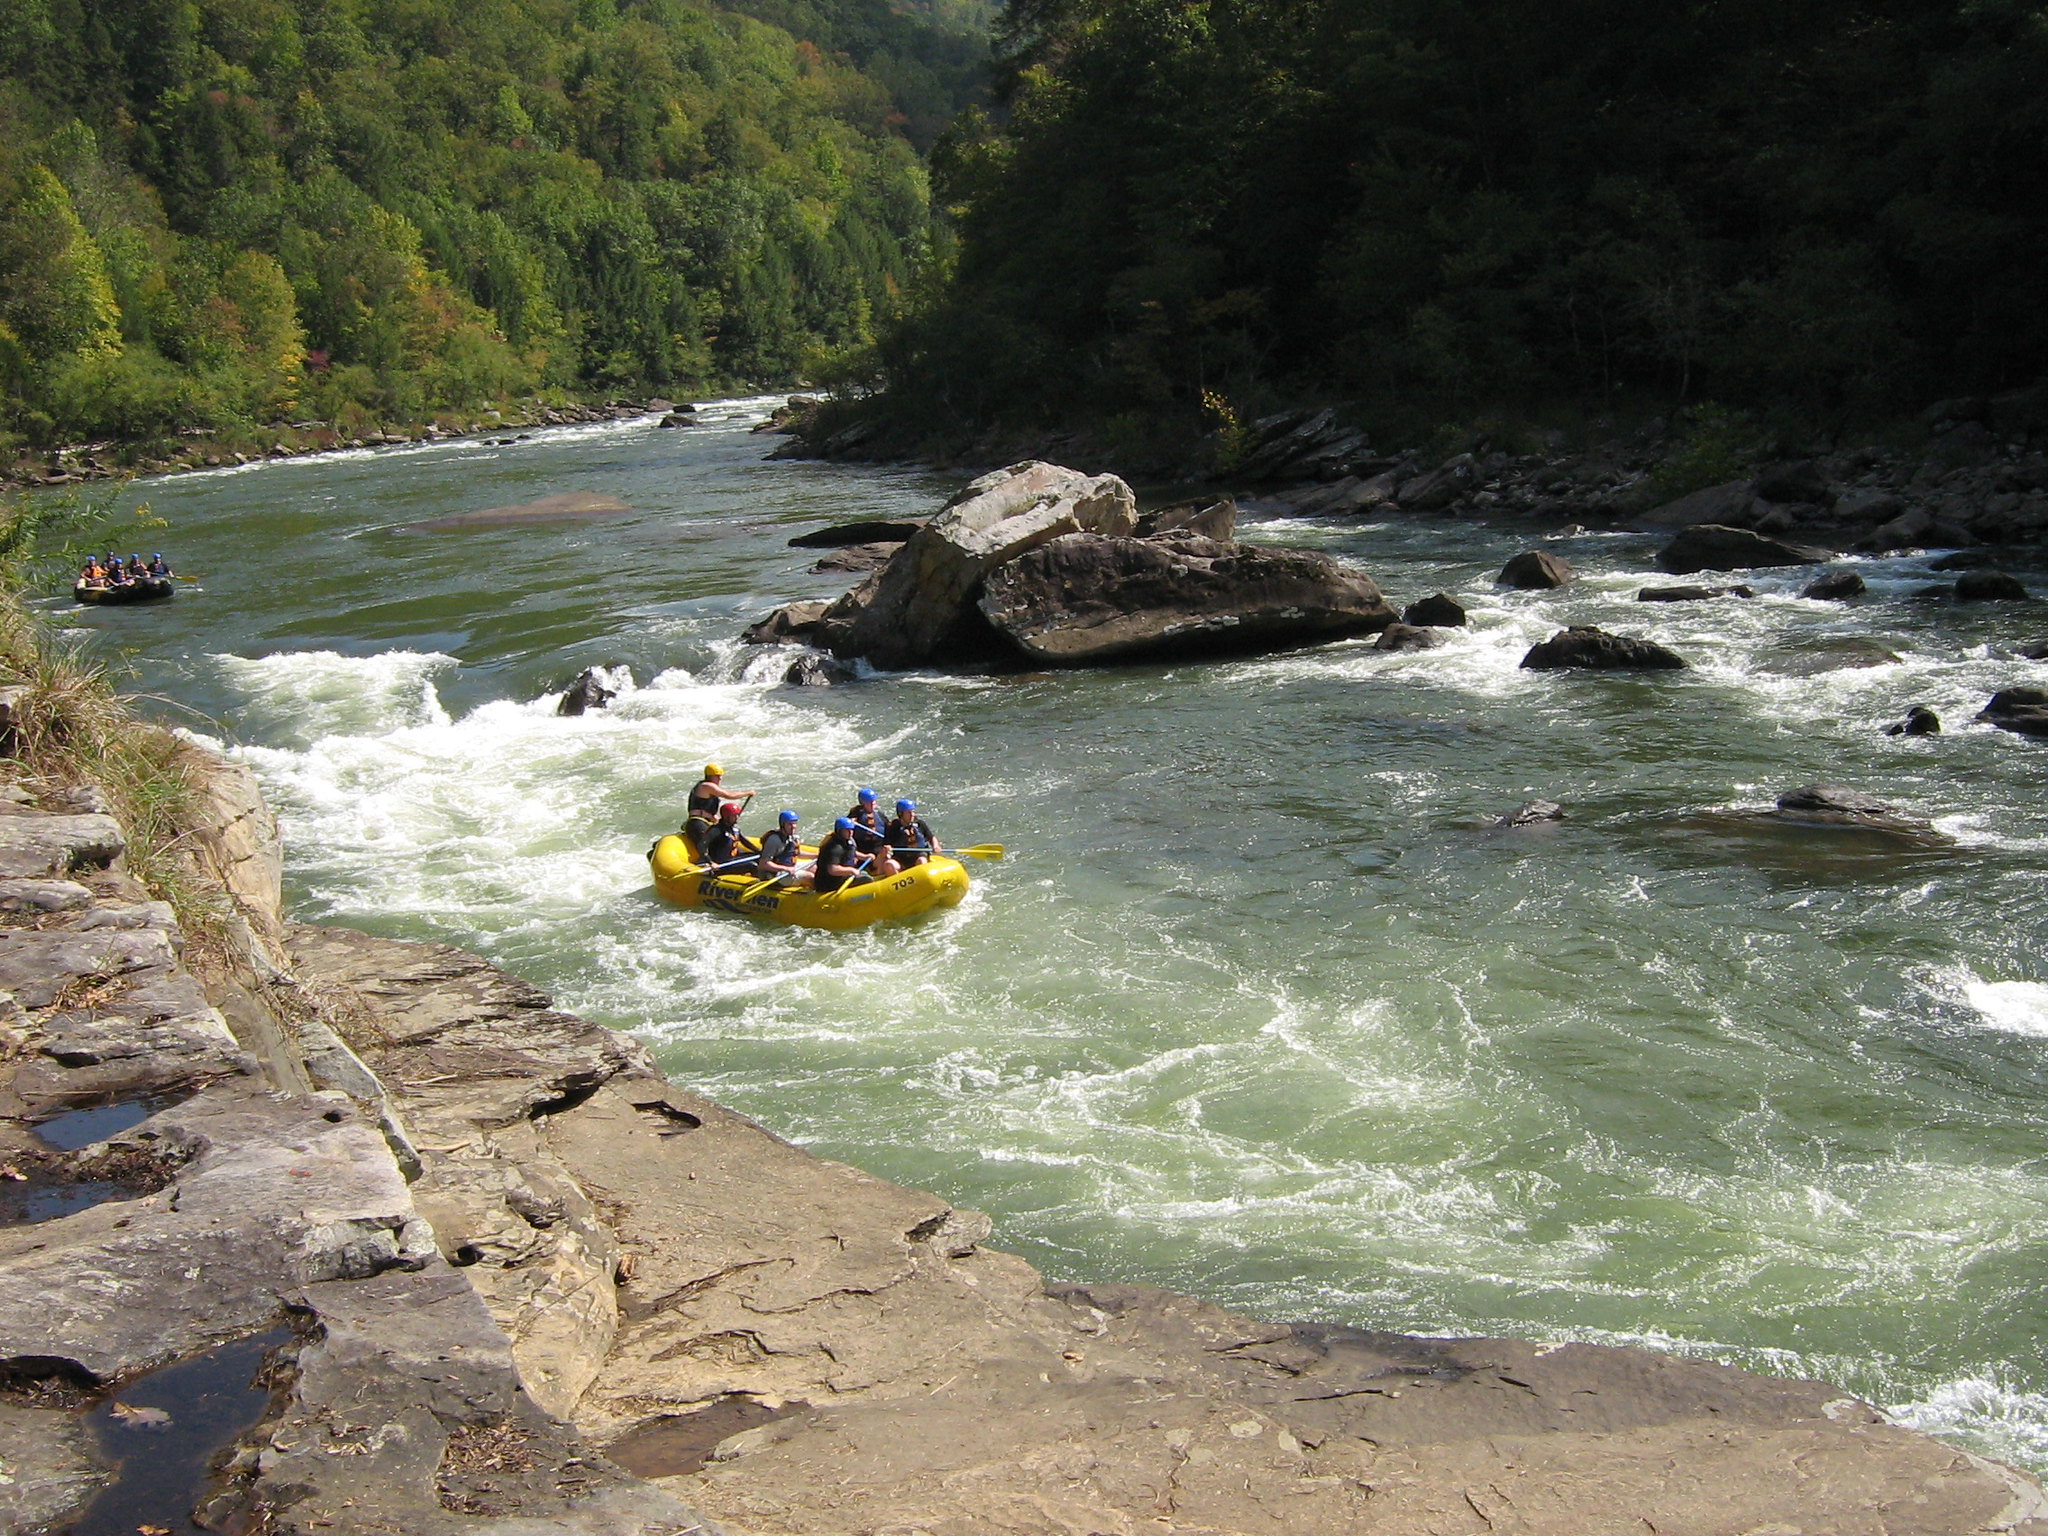 People paddle down rapids in yellow inflatable rafts.